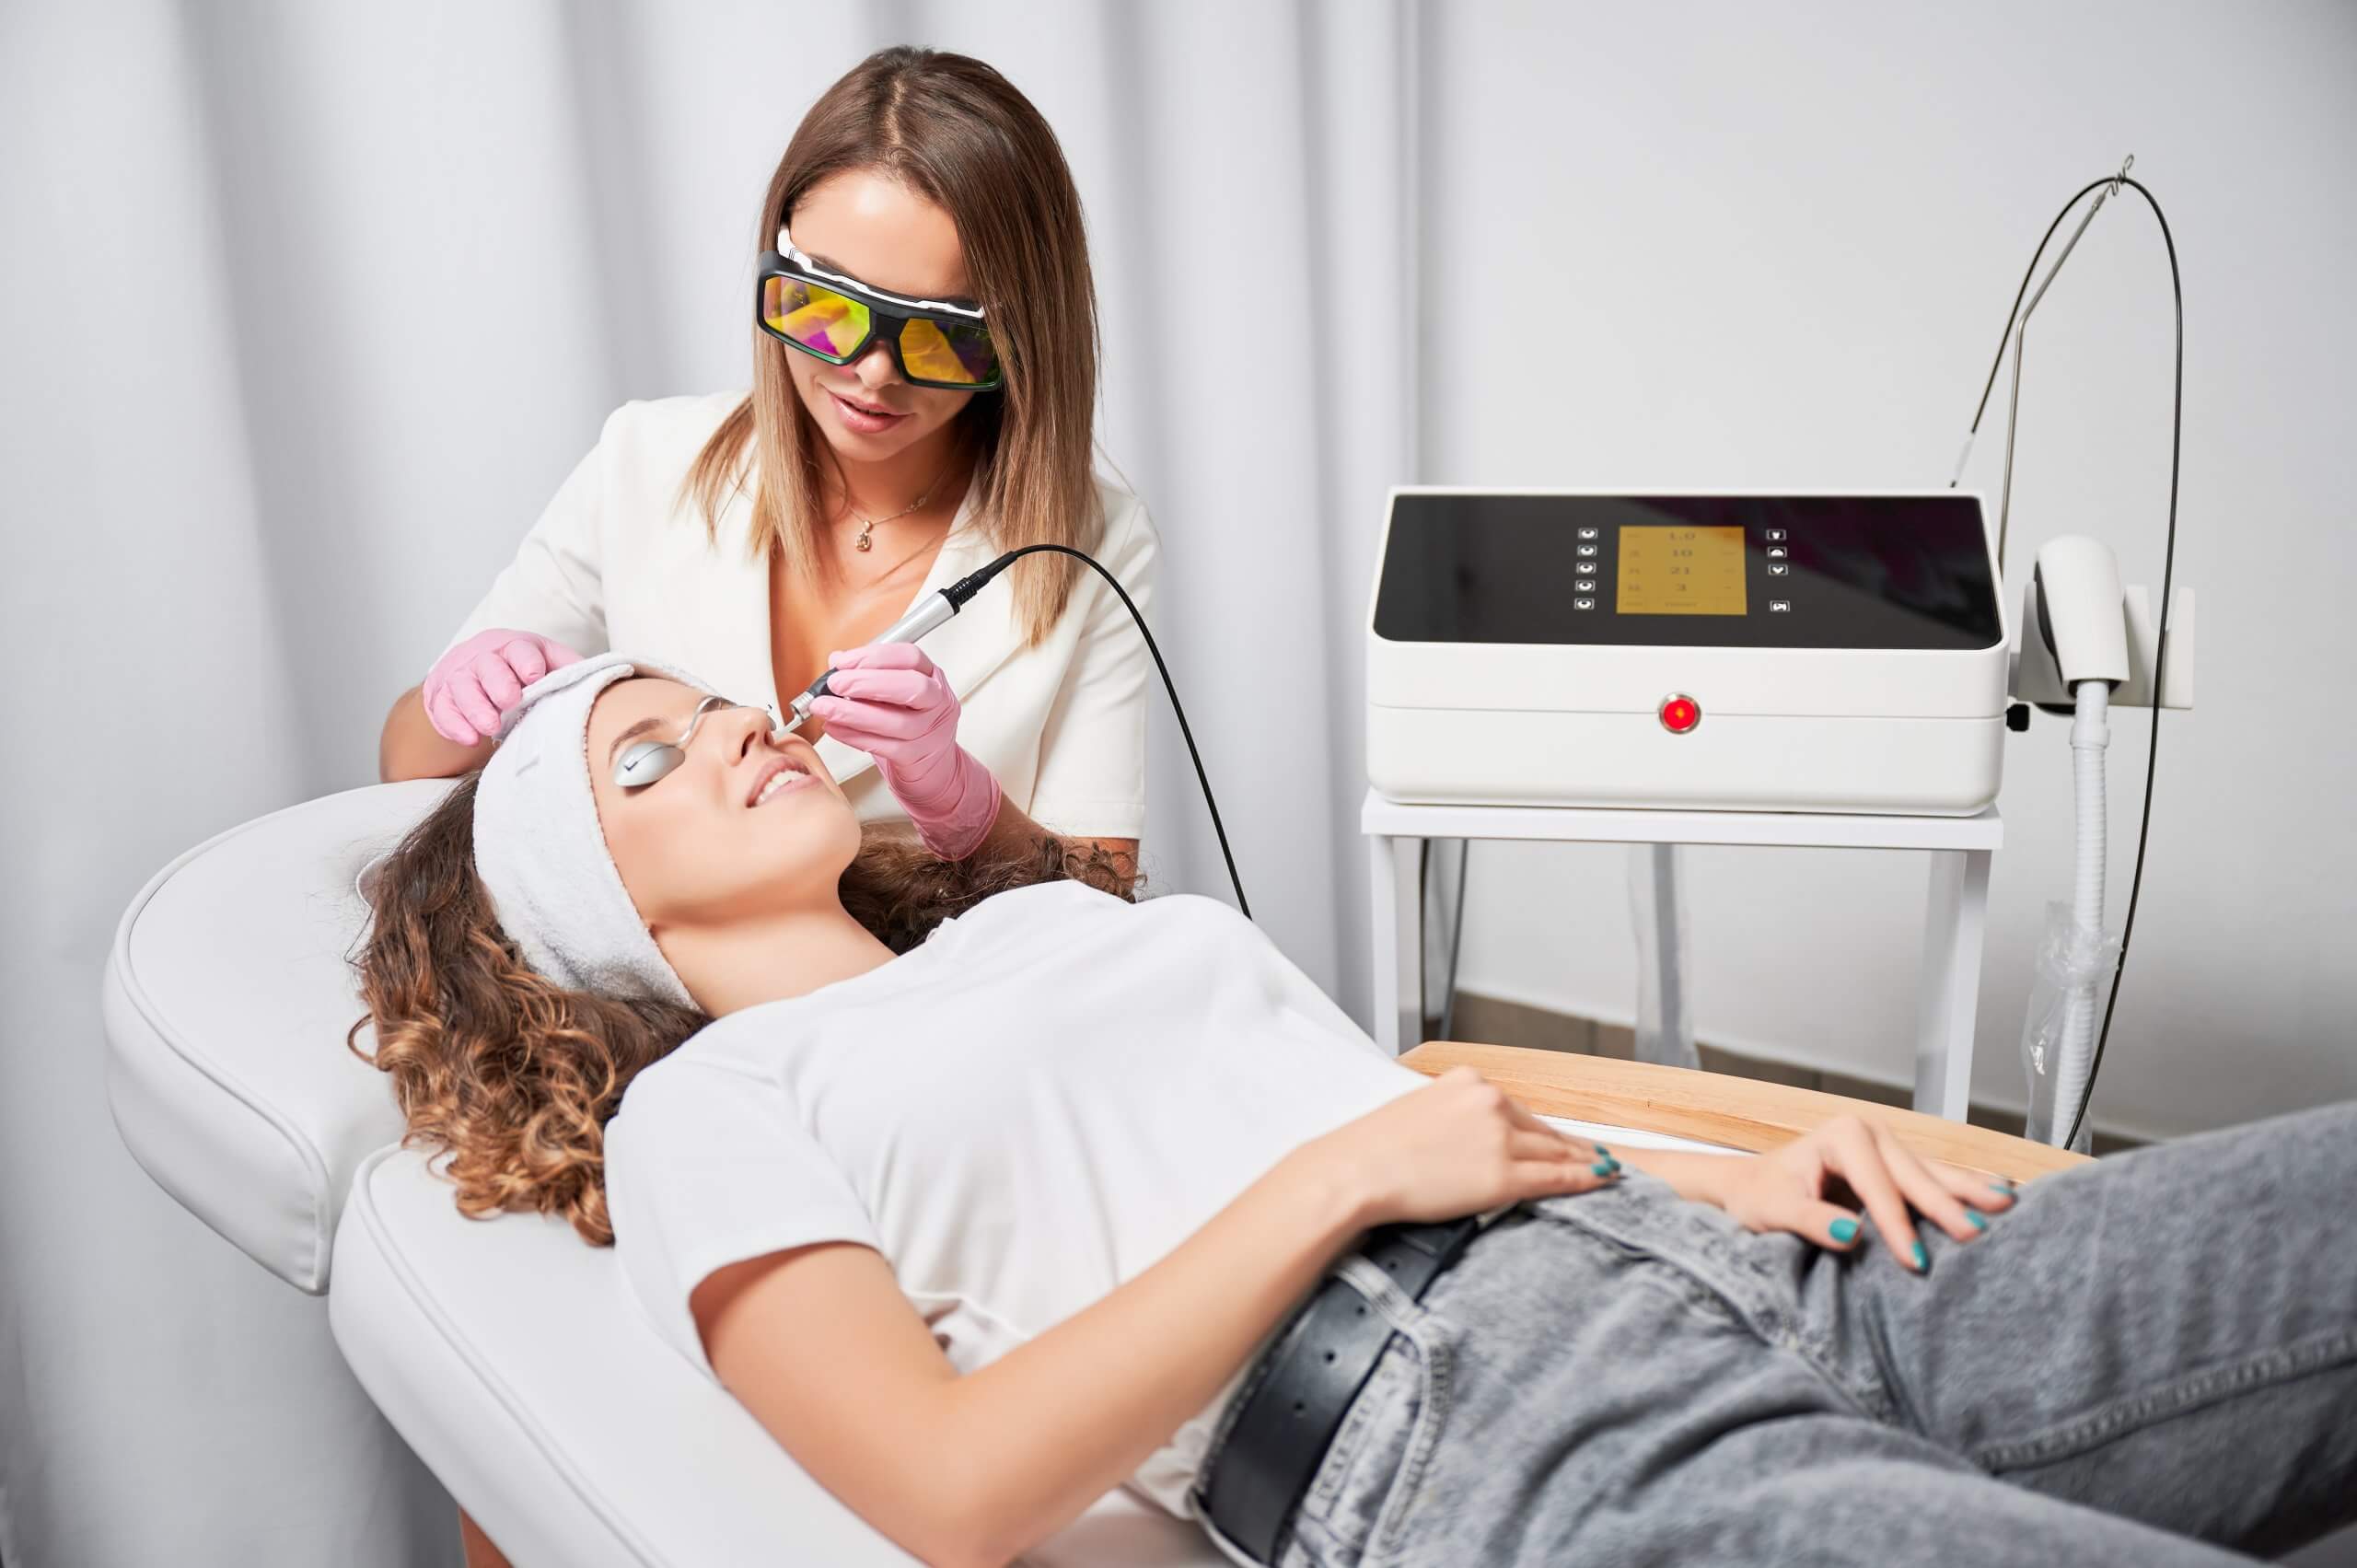 cosmetic procedure courses ensure you give the best cosmetic laser procedures to each client